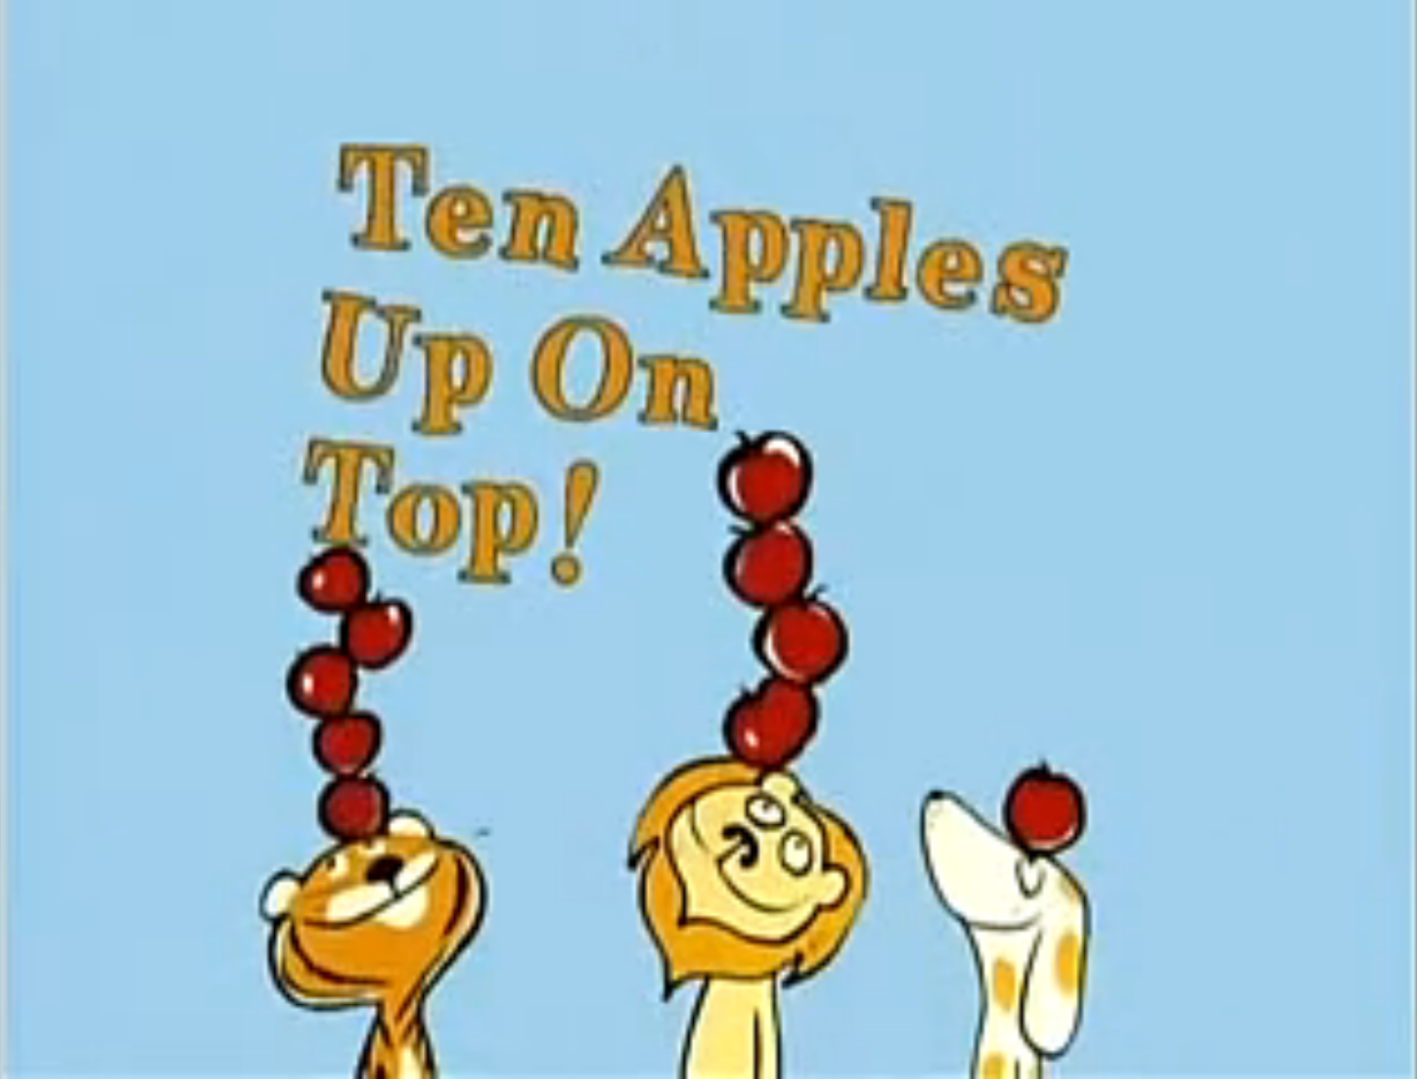 5 apples up on top